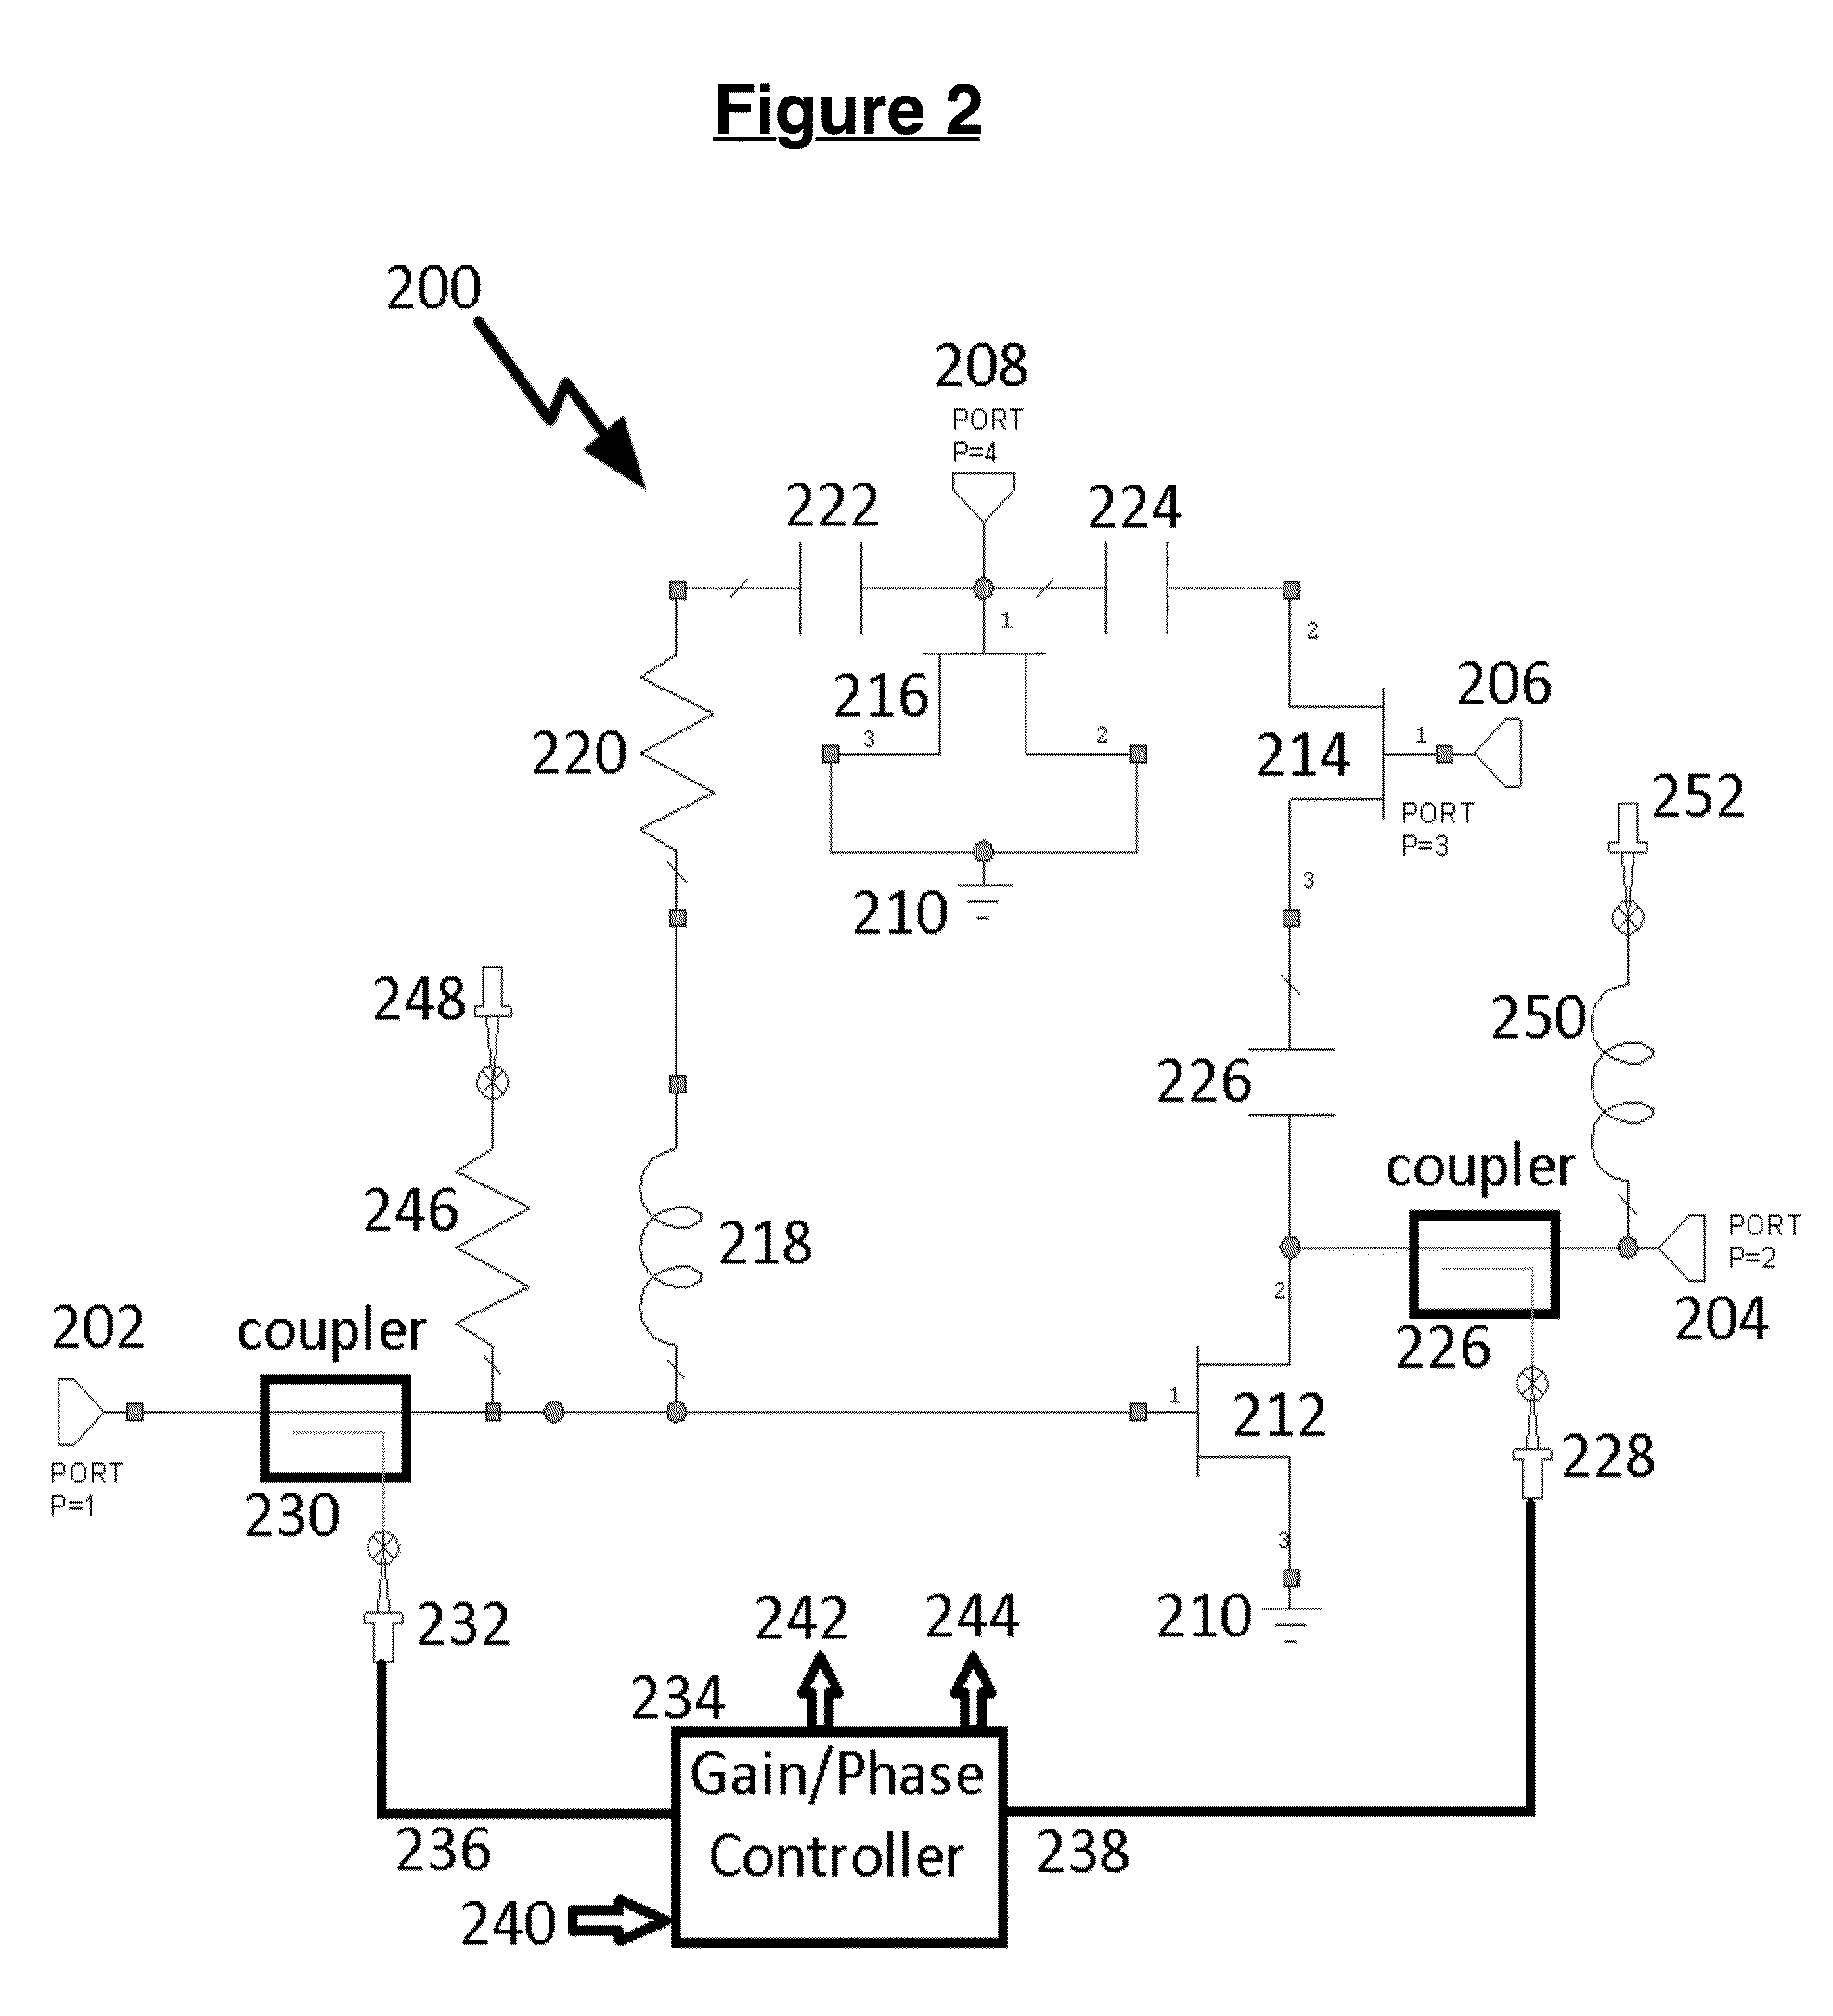 Method and system for linearizing an amplifier using transistor-level dynamic feedback